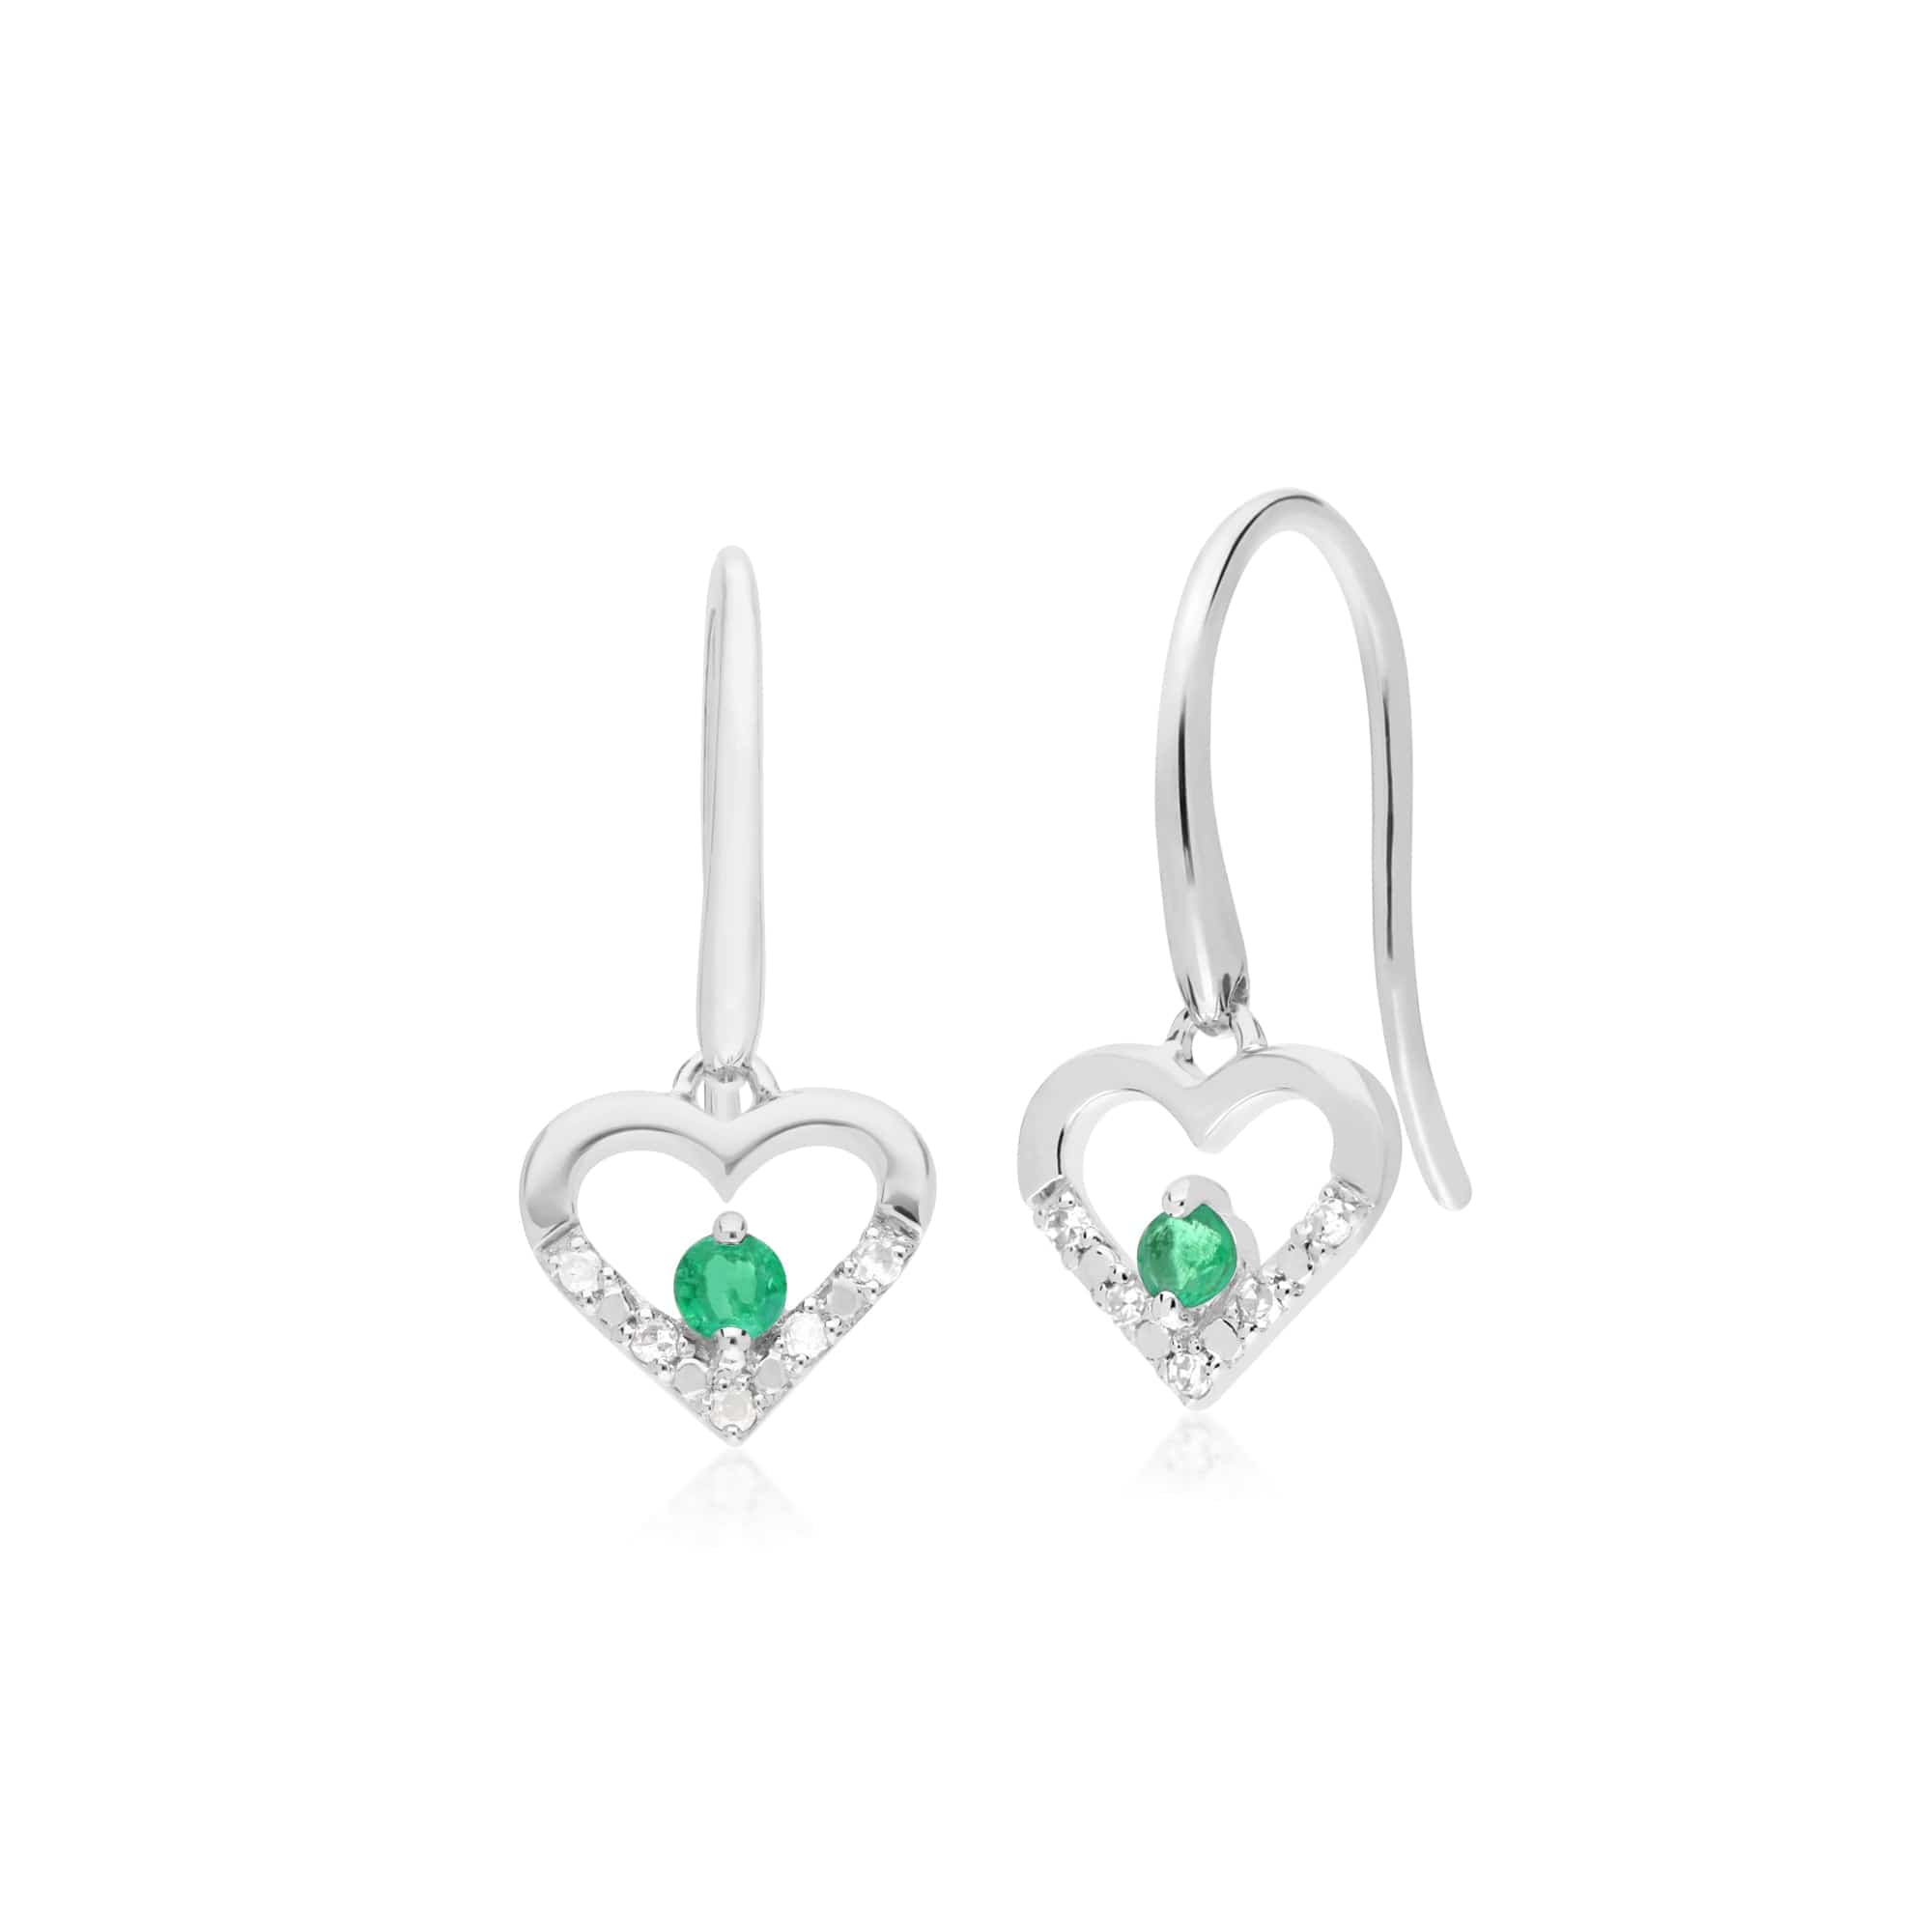 162E0258039 Classic Round Emerald & Diamond Love Heart Shaped Drop Earrings in 9ct White Gold 1